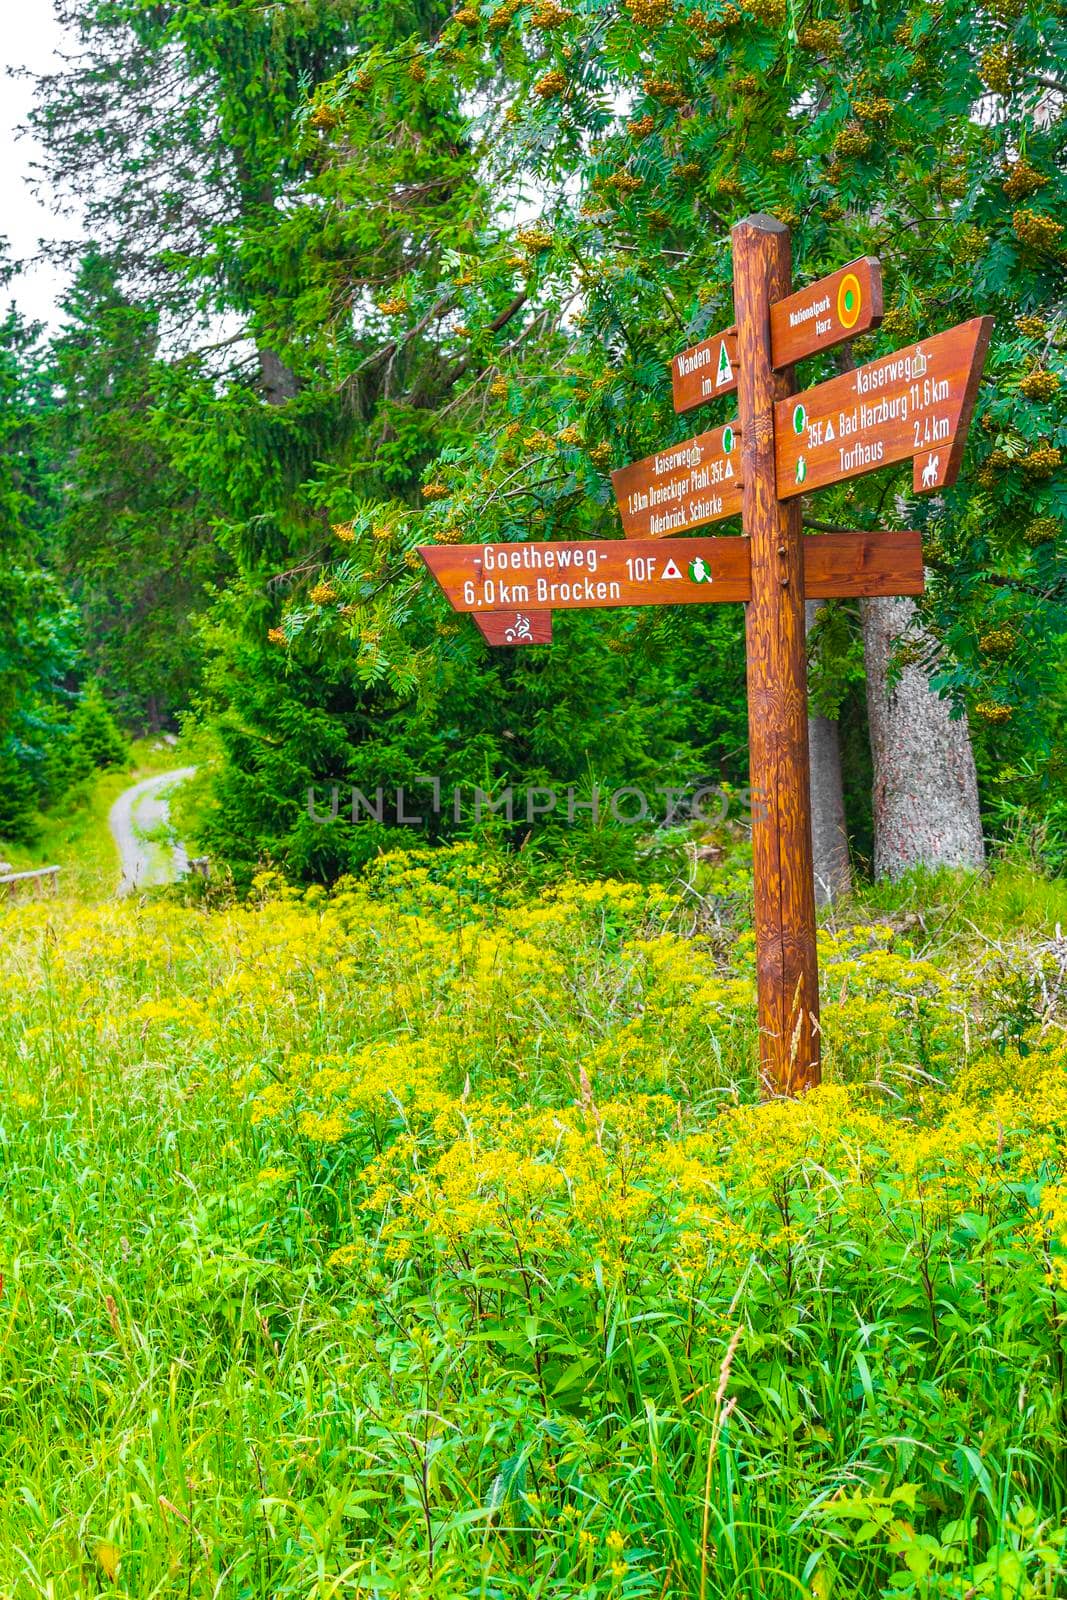 Lower Saxony Germany 17. August 2013 Forest landscape trekking path and information and direction board sign at Brocken mountain peak in Harz mountains Wernigerode Saxony-Anhalt Germany